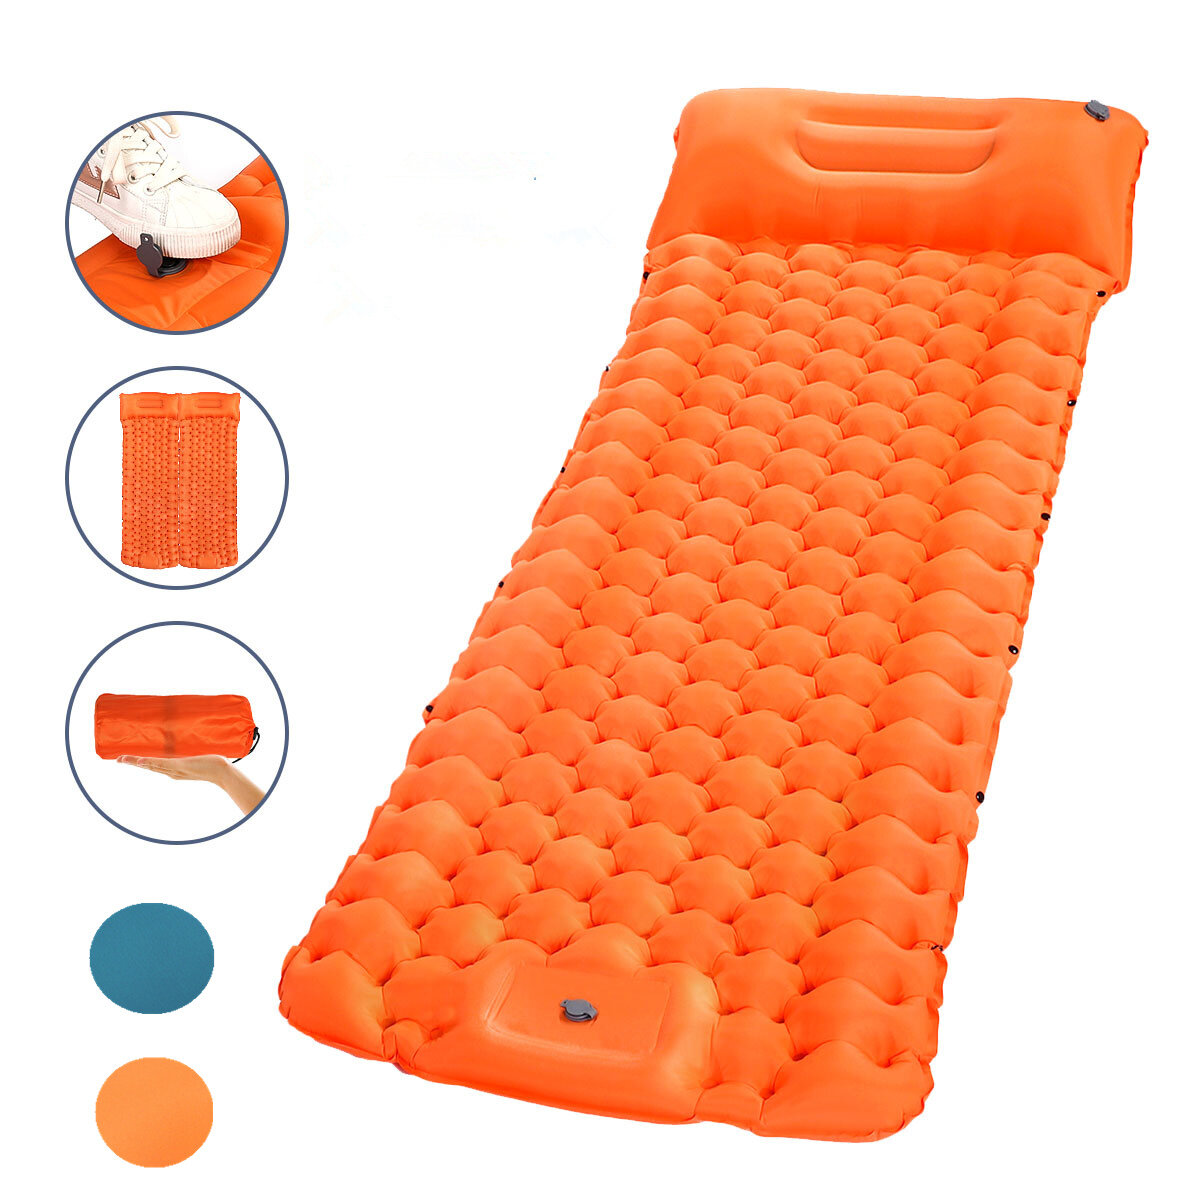 SGODDE Portable Inflatable Camping Mattress with Pillow Comfortable Air Cushion Outdoor Camping Travel Tool